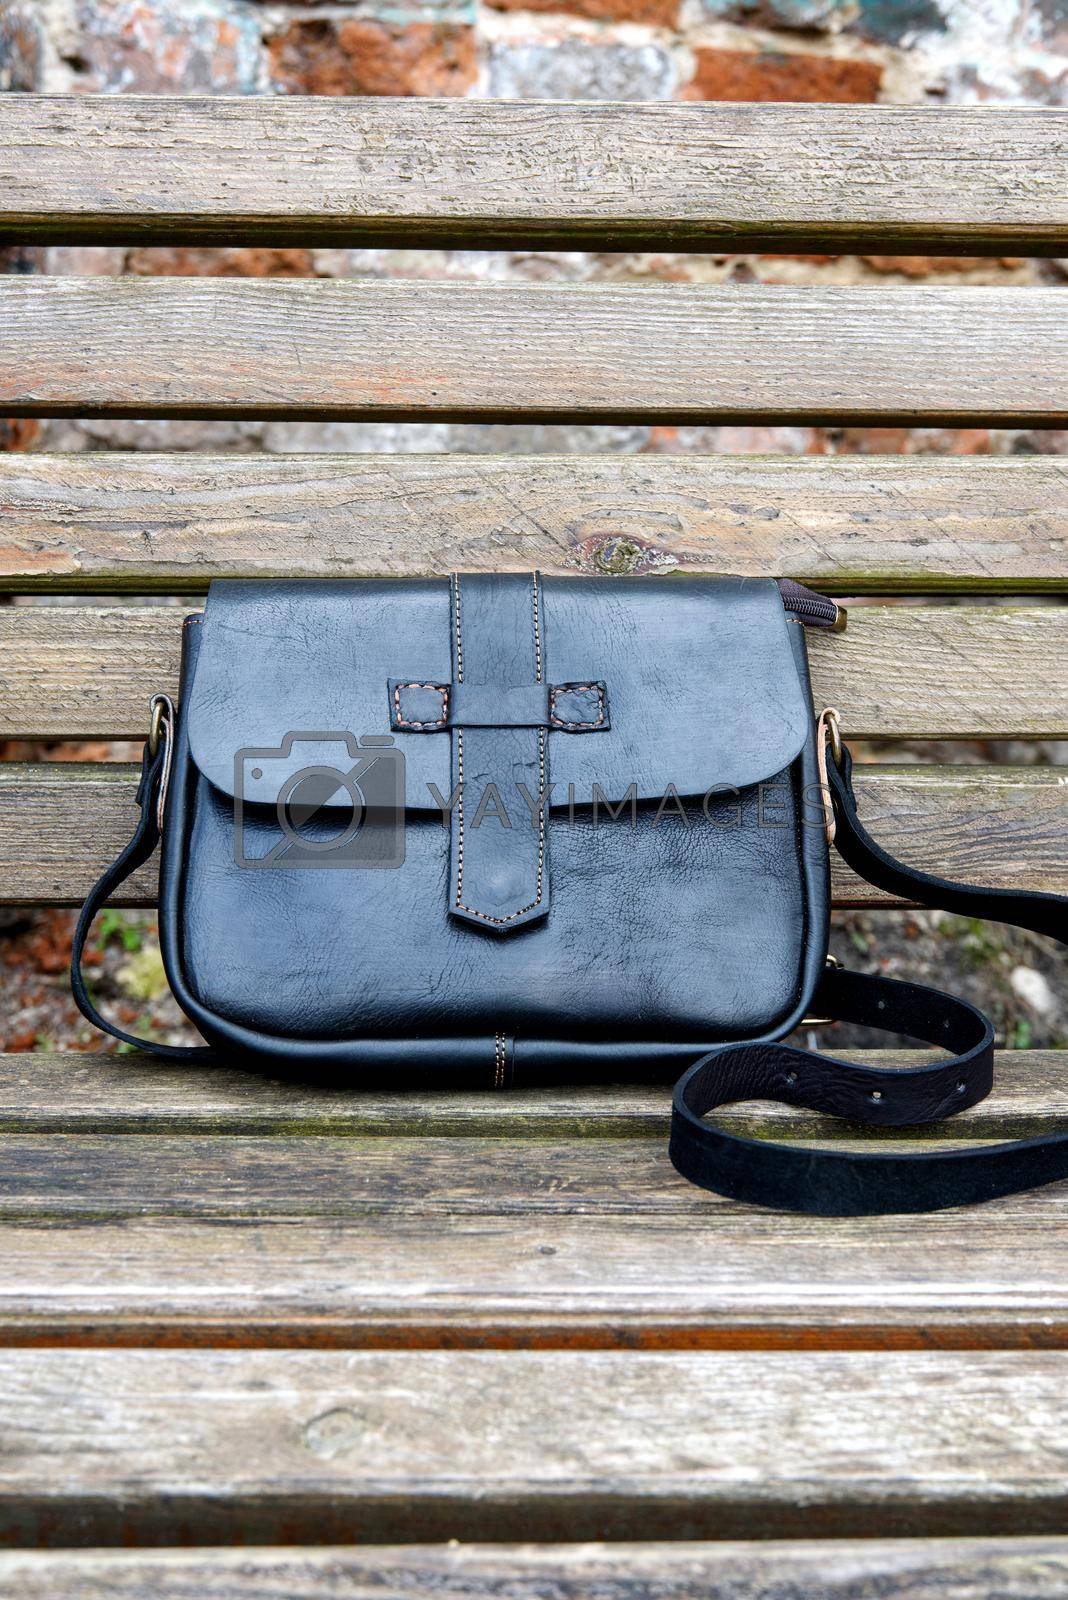 Royalty free image of close-up photo of black leather handbag on a wooden bench by Ashtray25